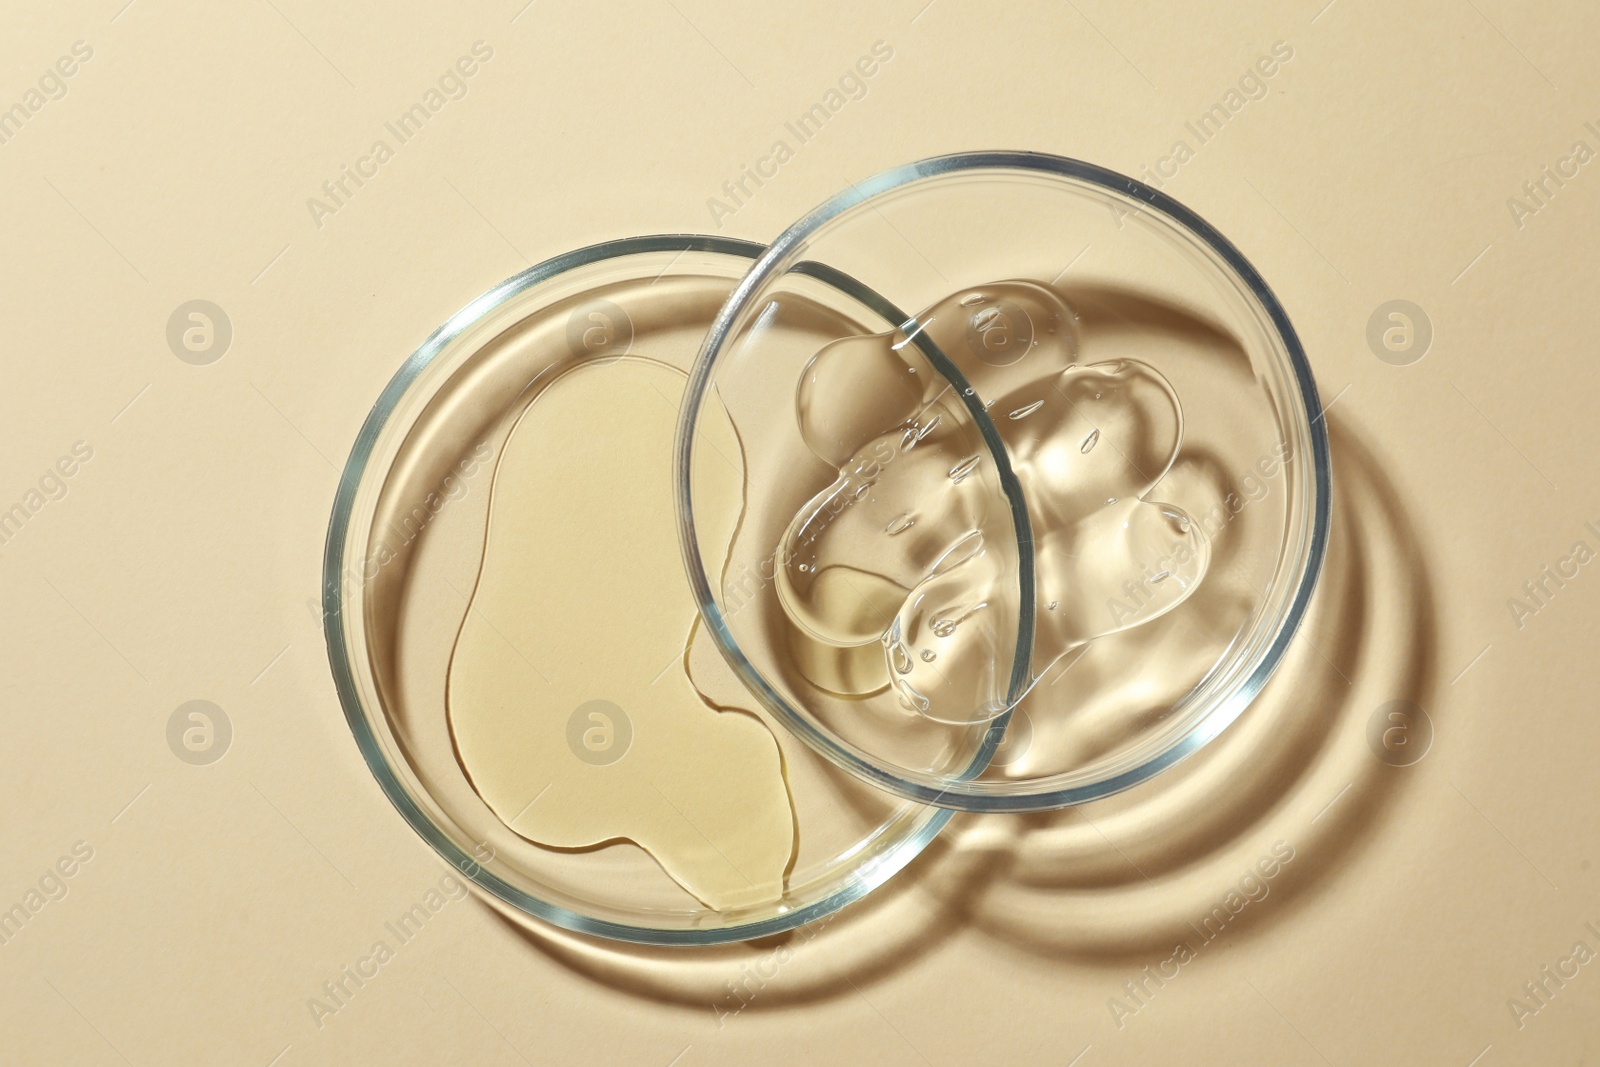 Photo of Petri dishes and cosmetic products on beige background, flat lay